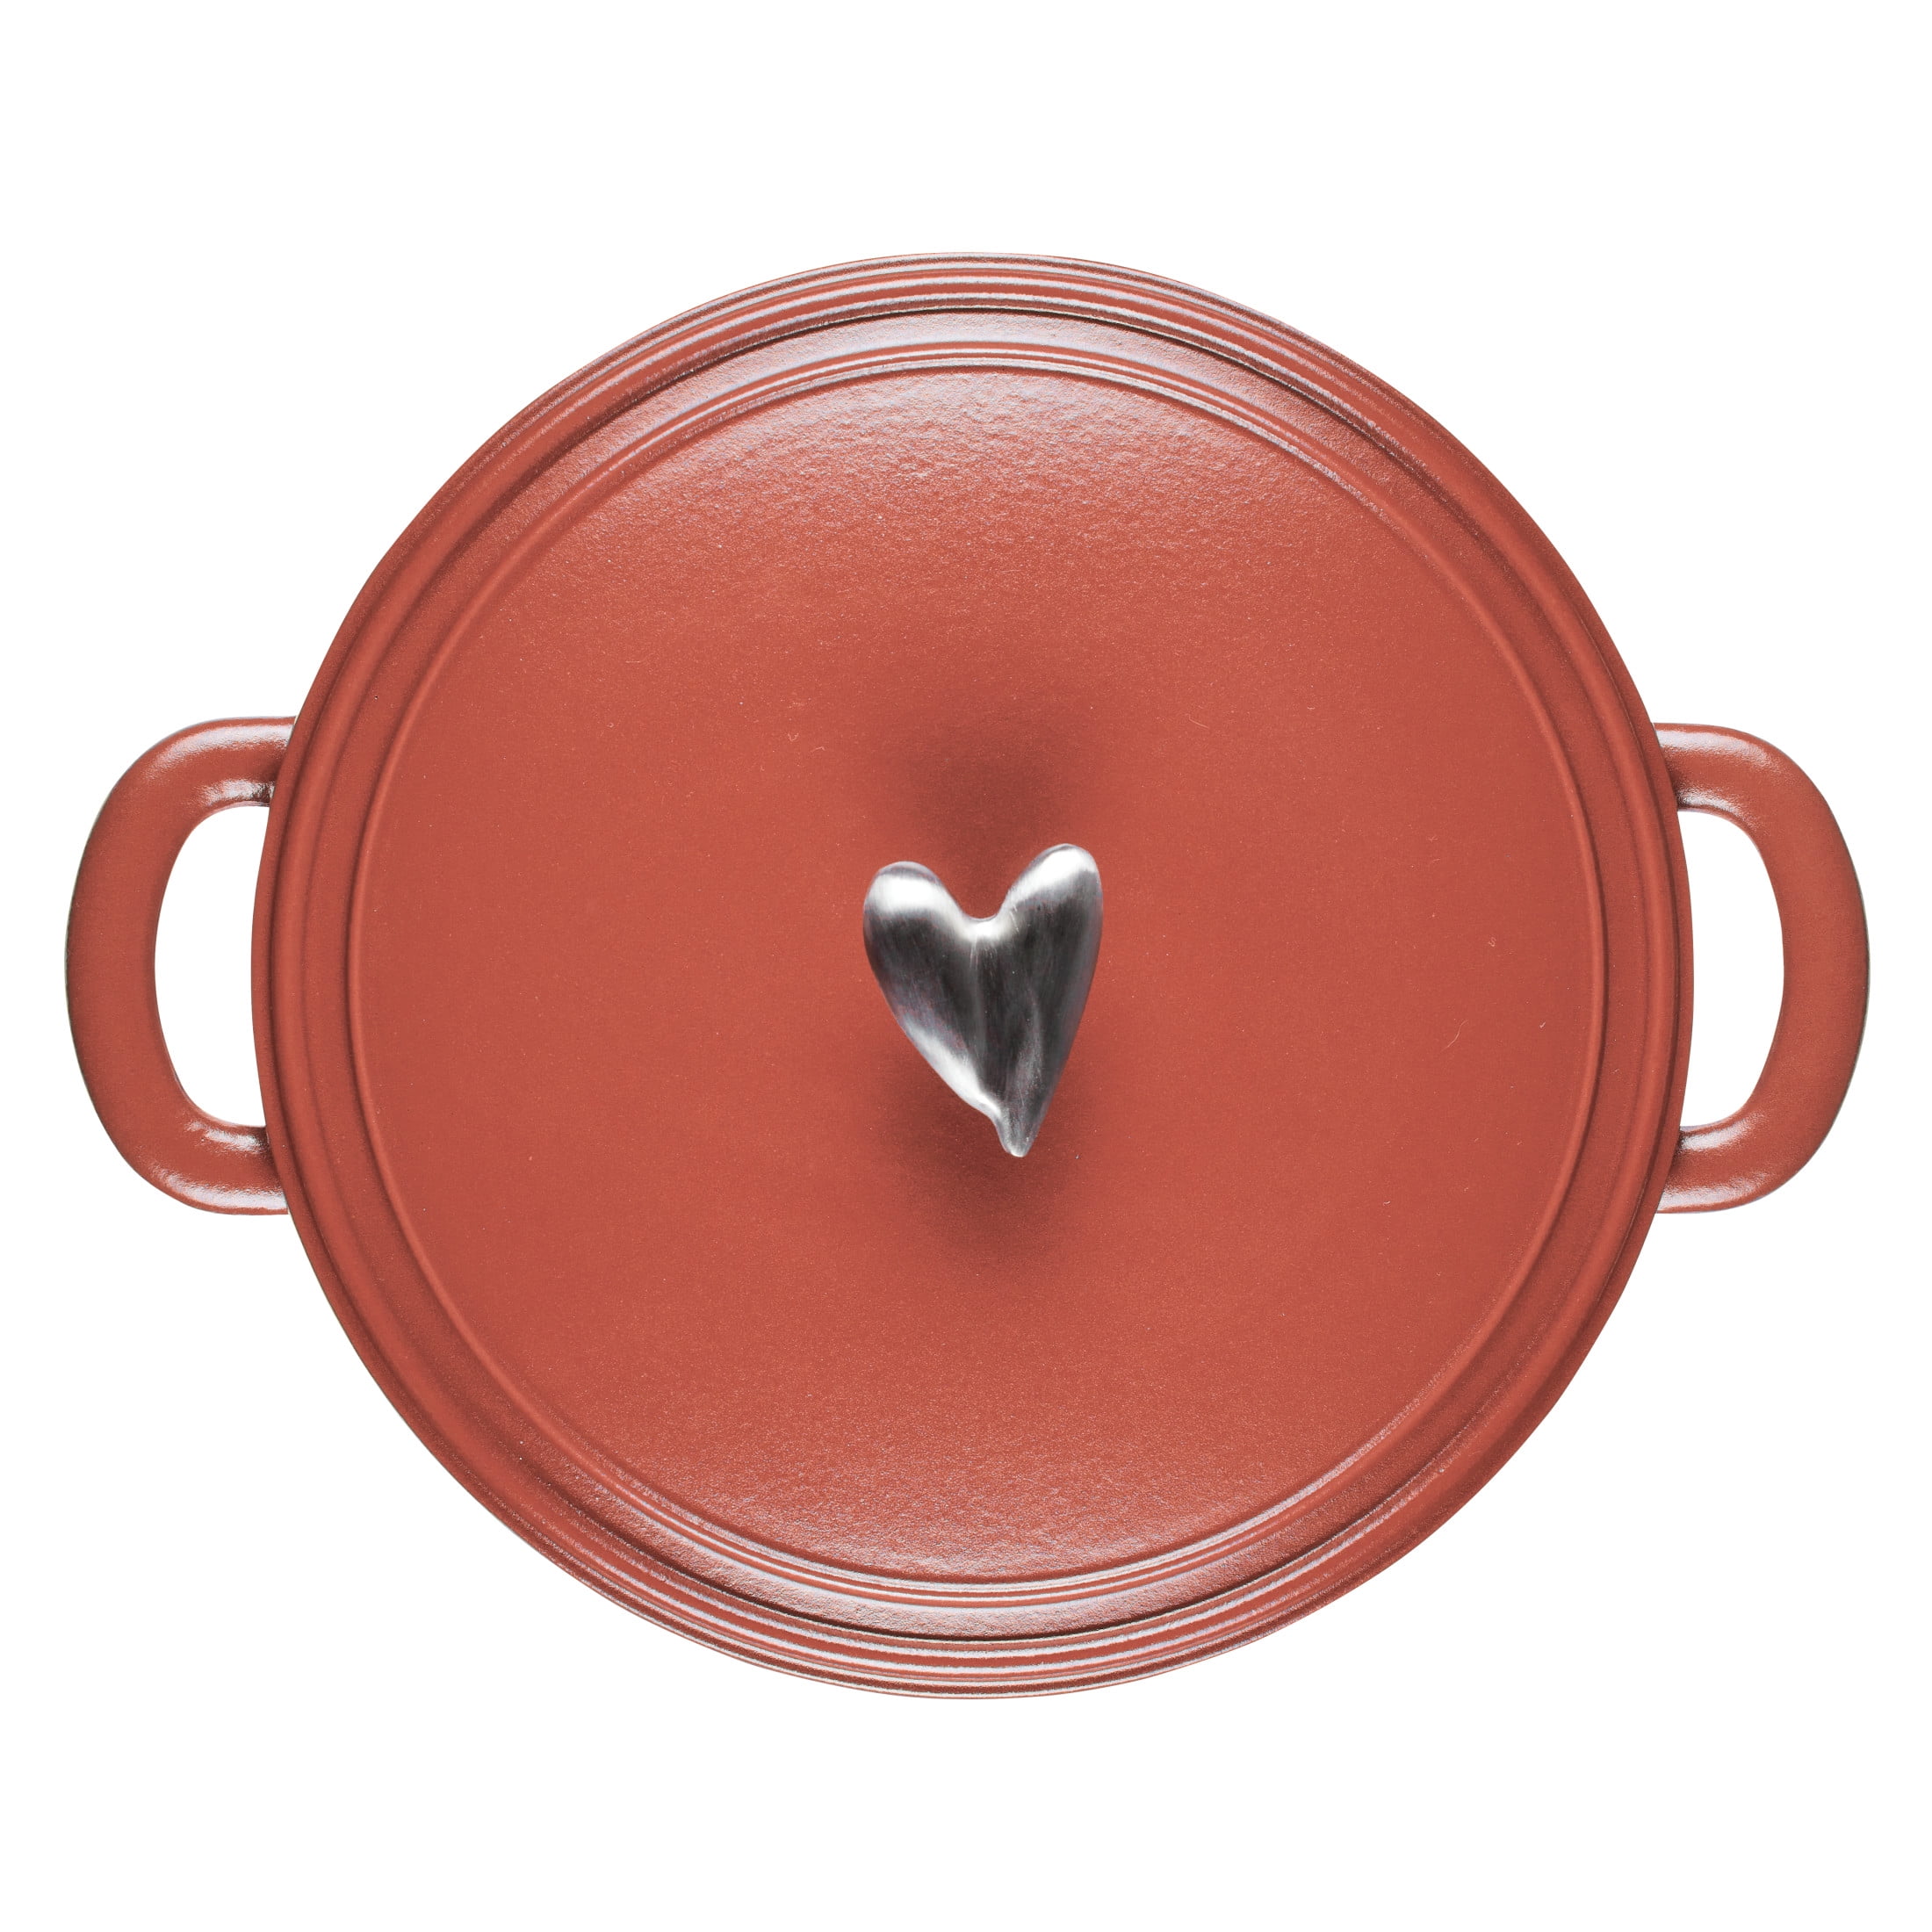 Ayesha Curry Enameled Cast Iron Induction Dutch Oven with Lid, 5.5-Quart,  Brown Sugar & Reviews